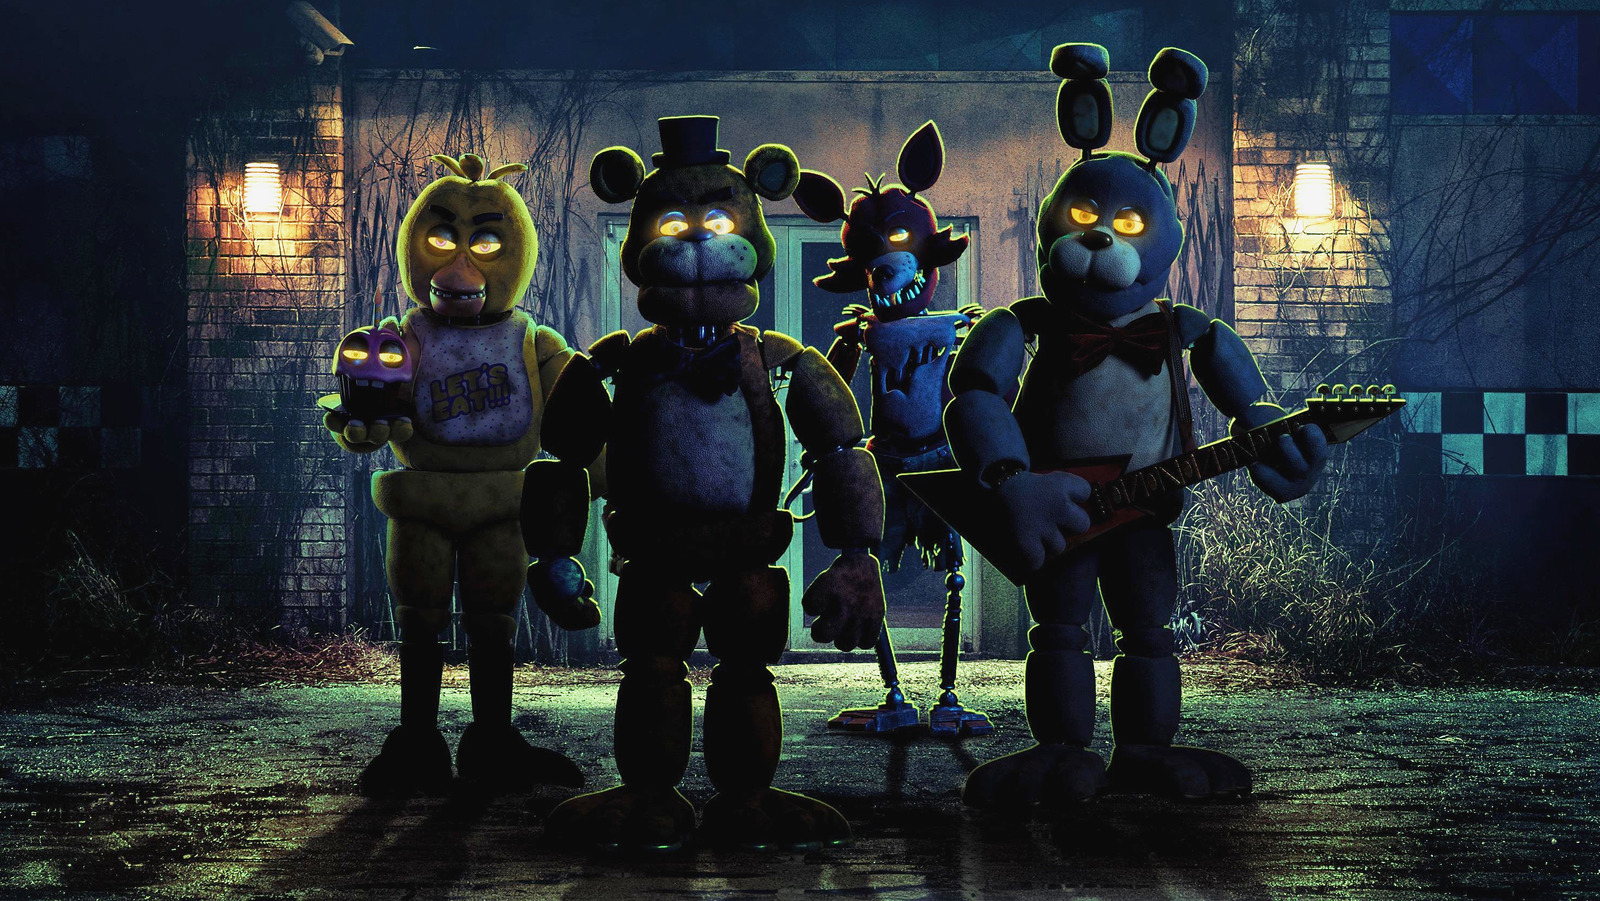 Are you the pro in Five Nights at Freddy's / FNaF?